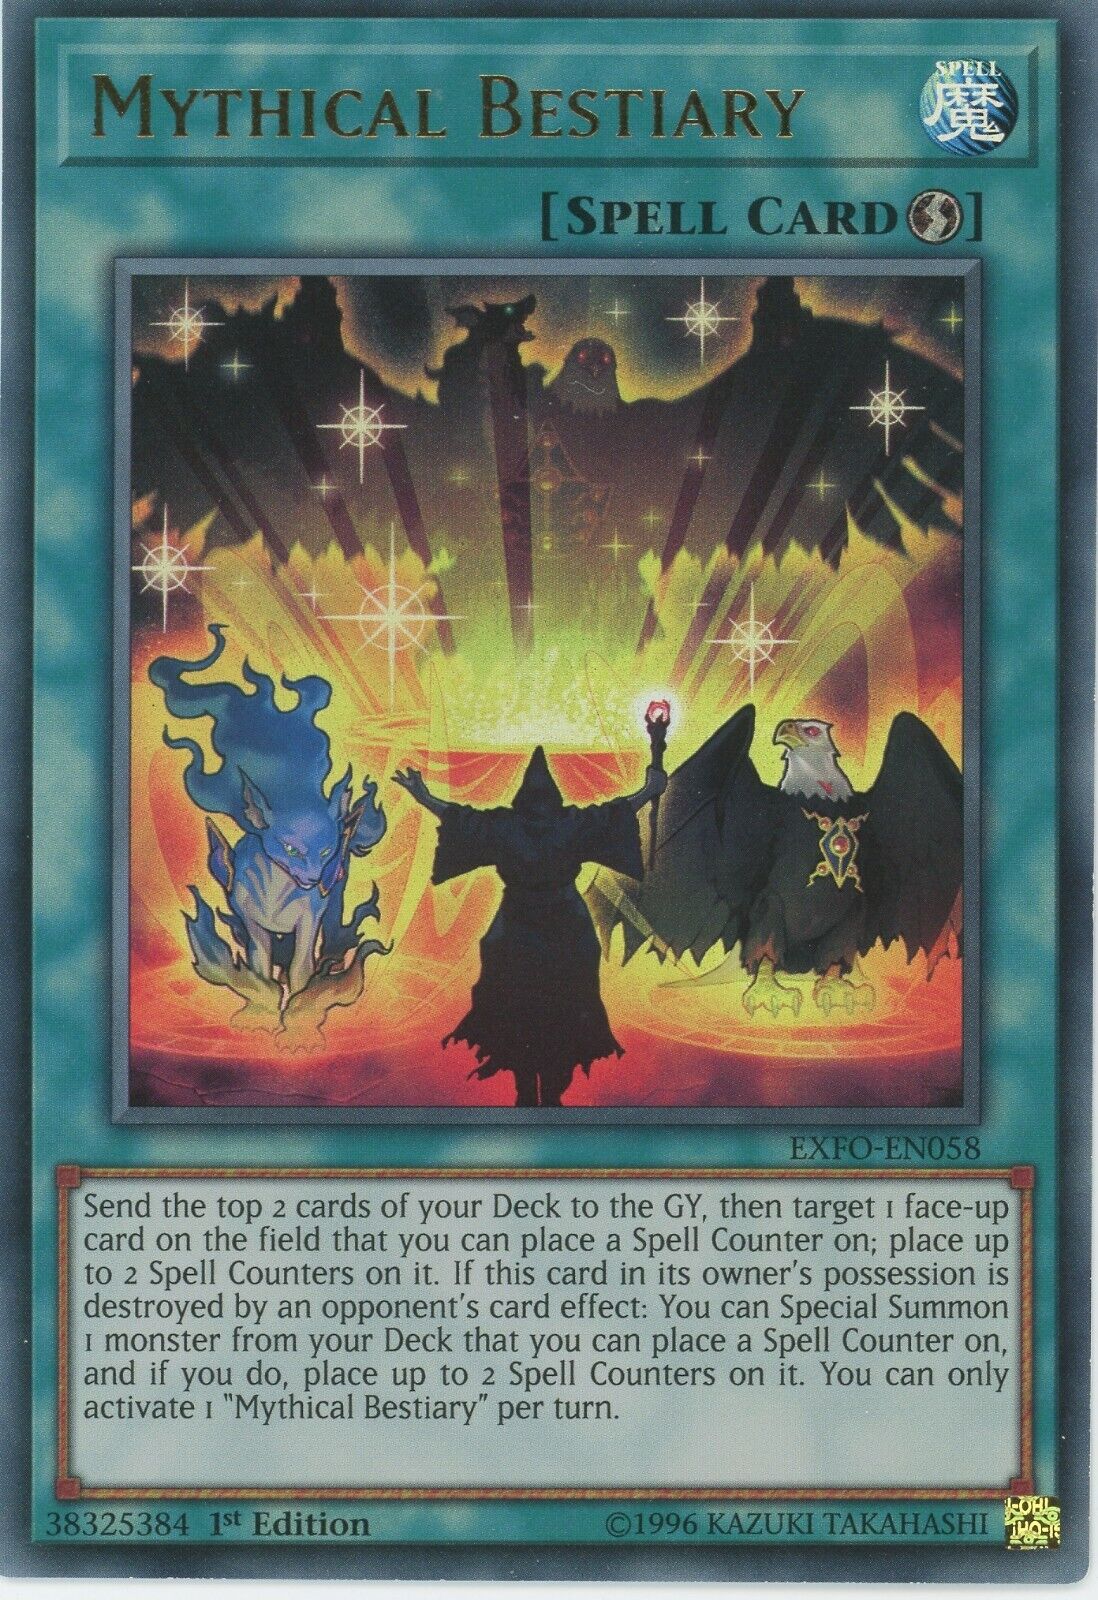 Yugioh Mythical Bestiary EXFO-EN058 Ultra Rare Mint Condition